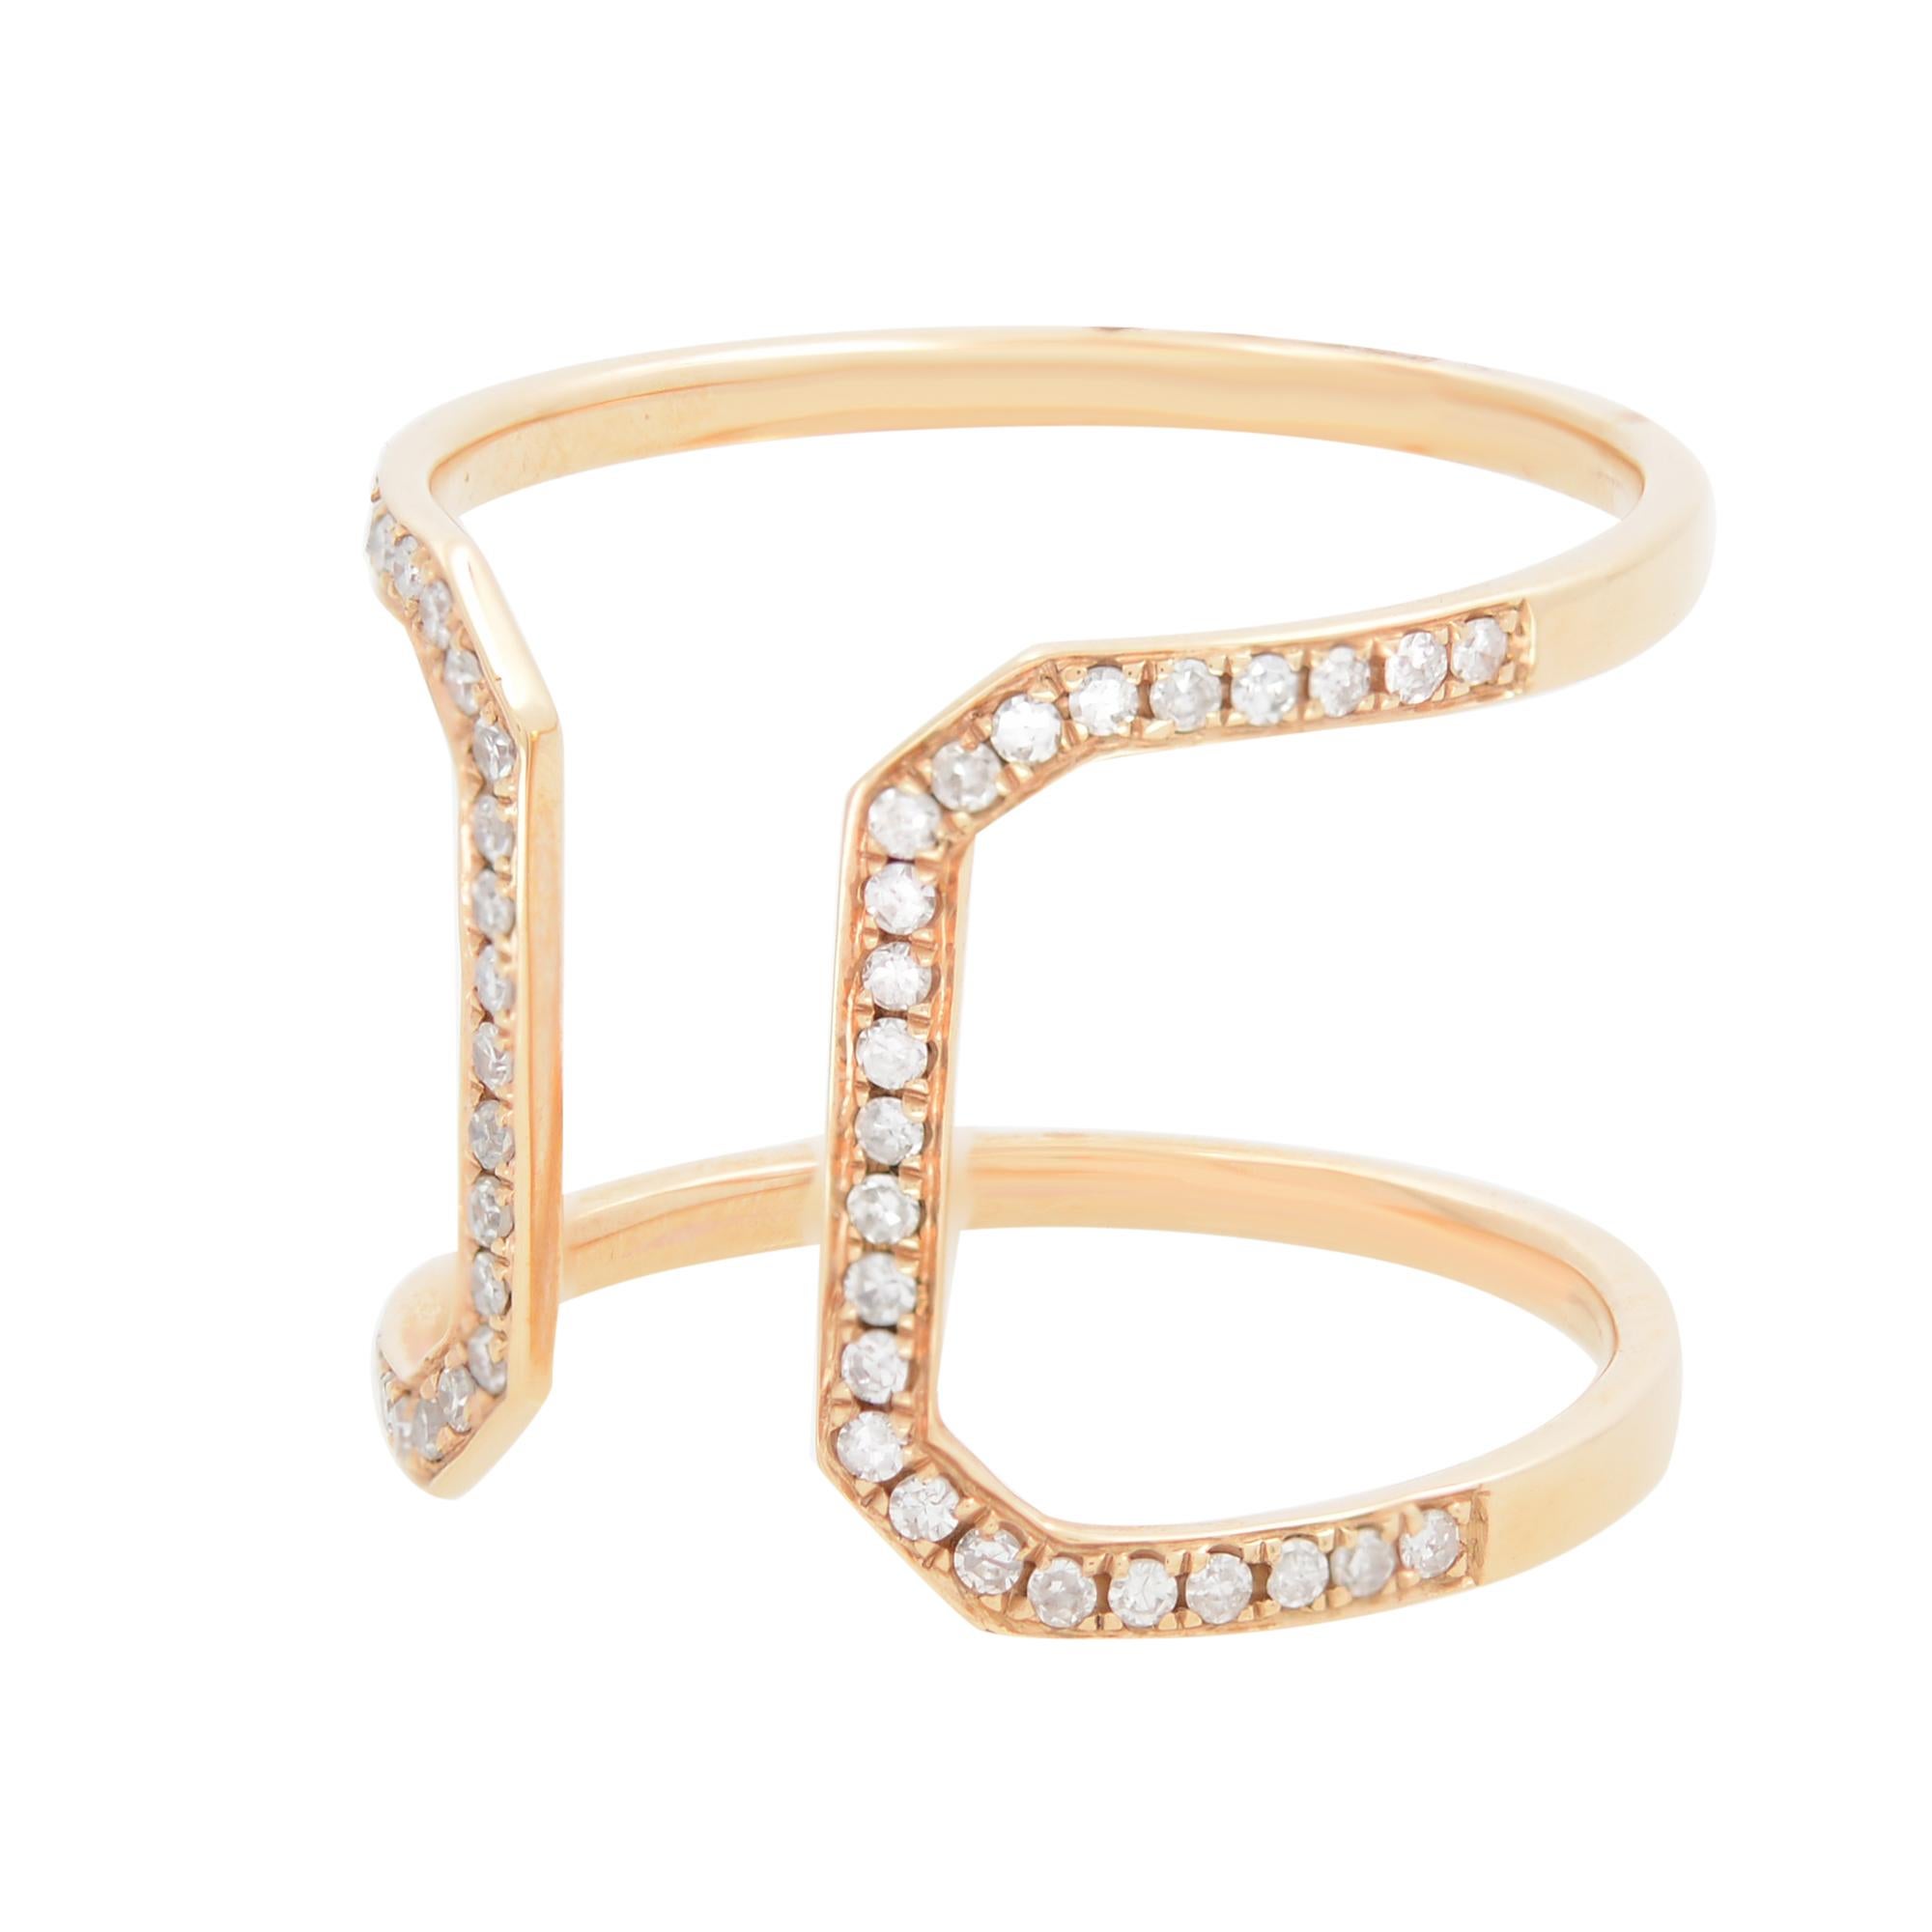 This 18K rose gold diamond guard designed ring is set with 0.25cttw tiny round brilliant cut diamonds. Diamond color H-I and SI clarity. This unique ring is very chic and stylish. Looks great alone or with other rings. Ring size 7.5. Width of the